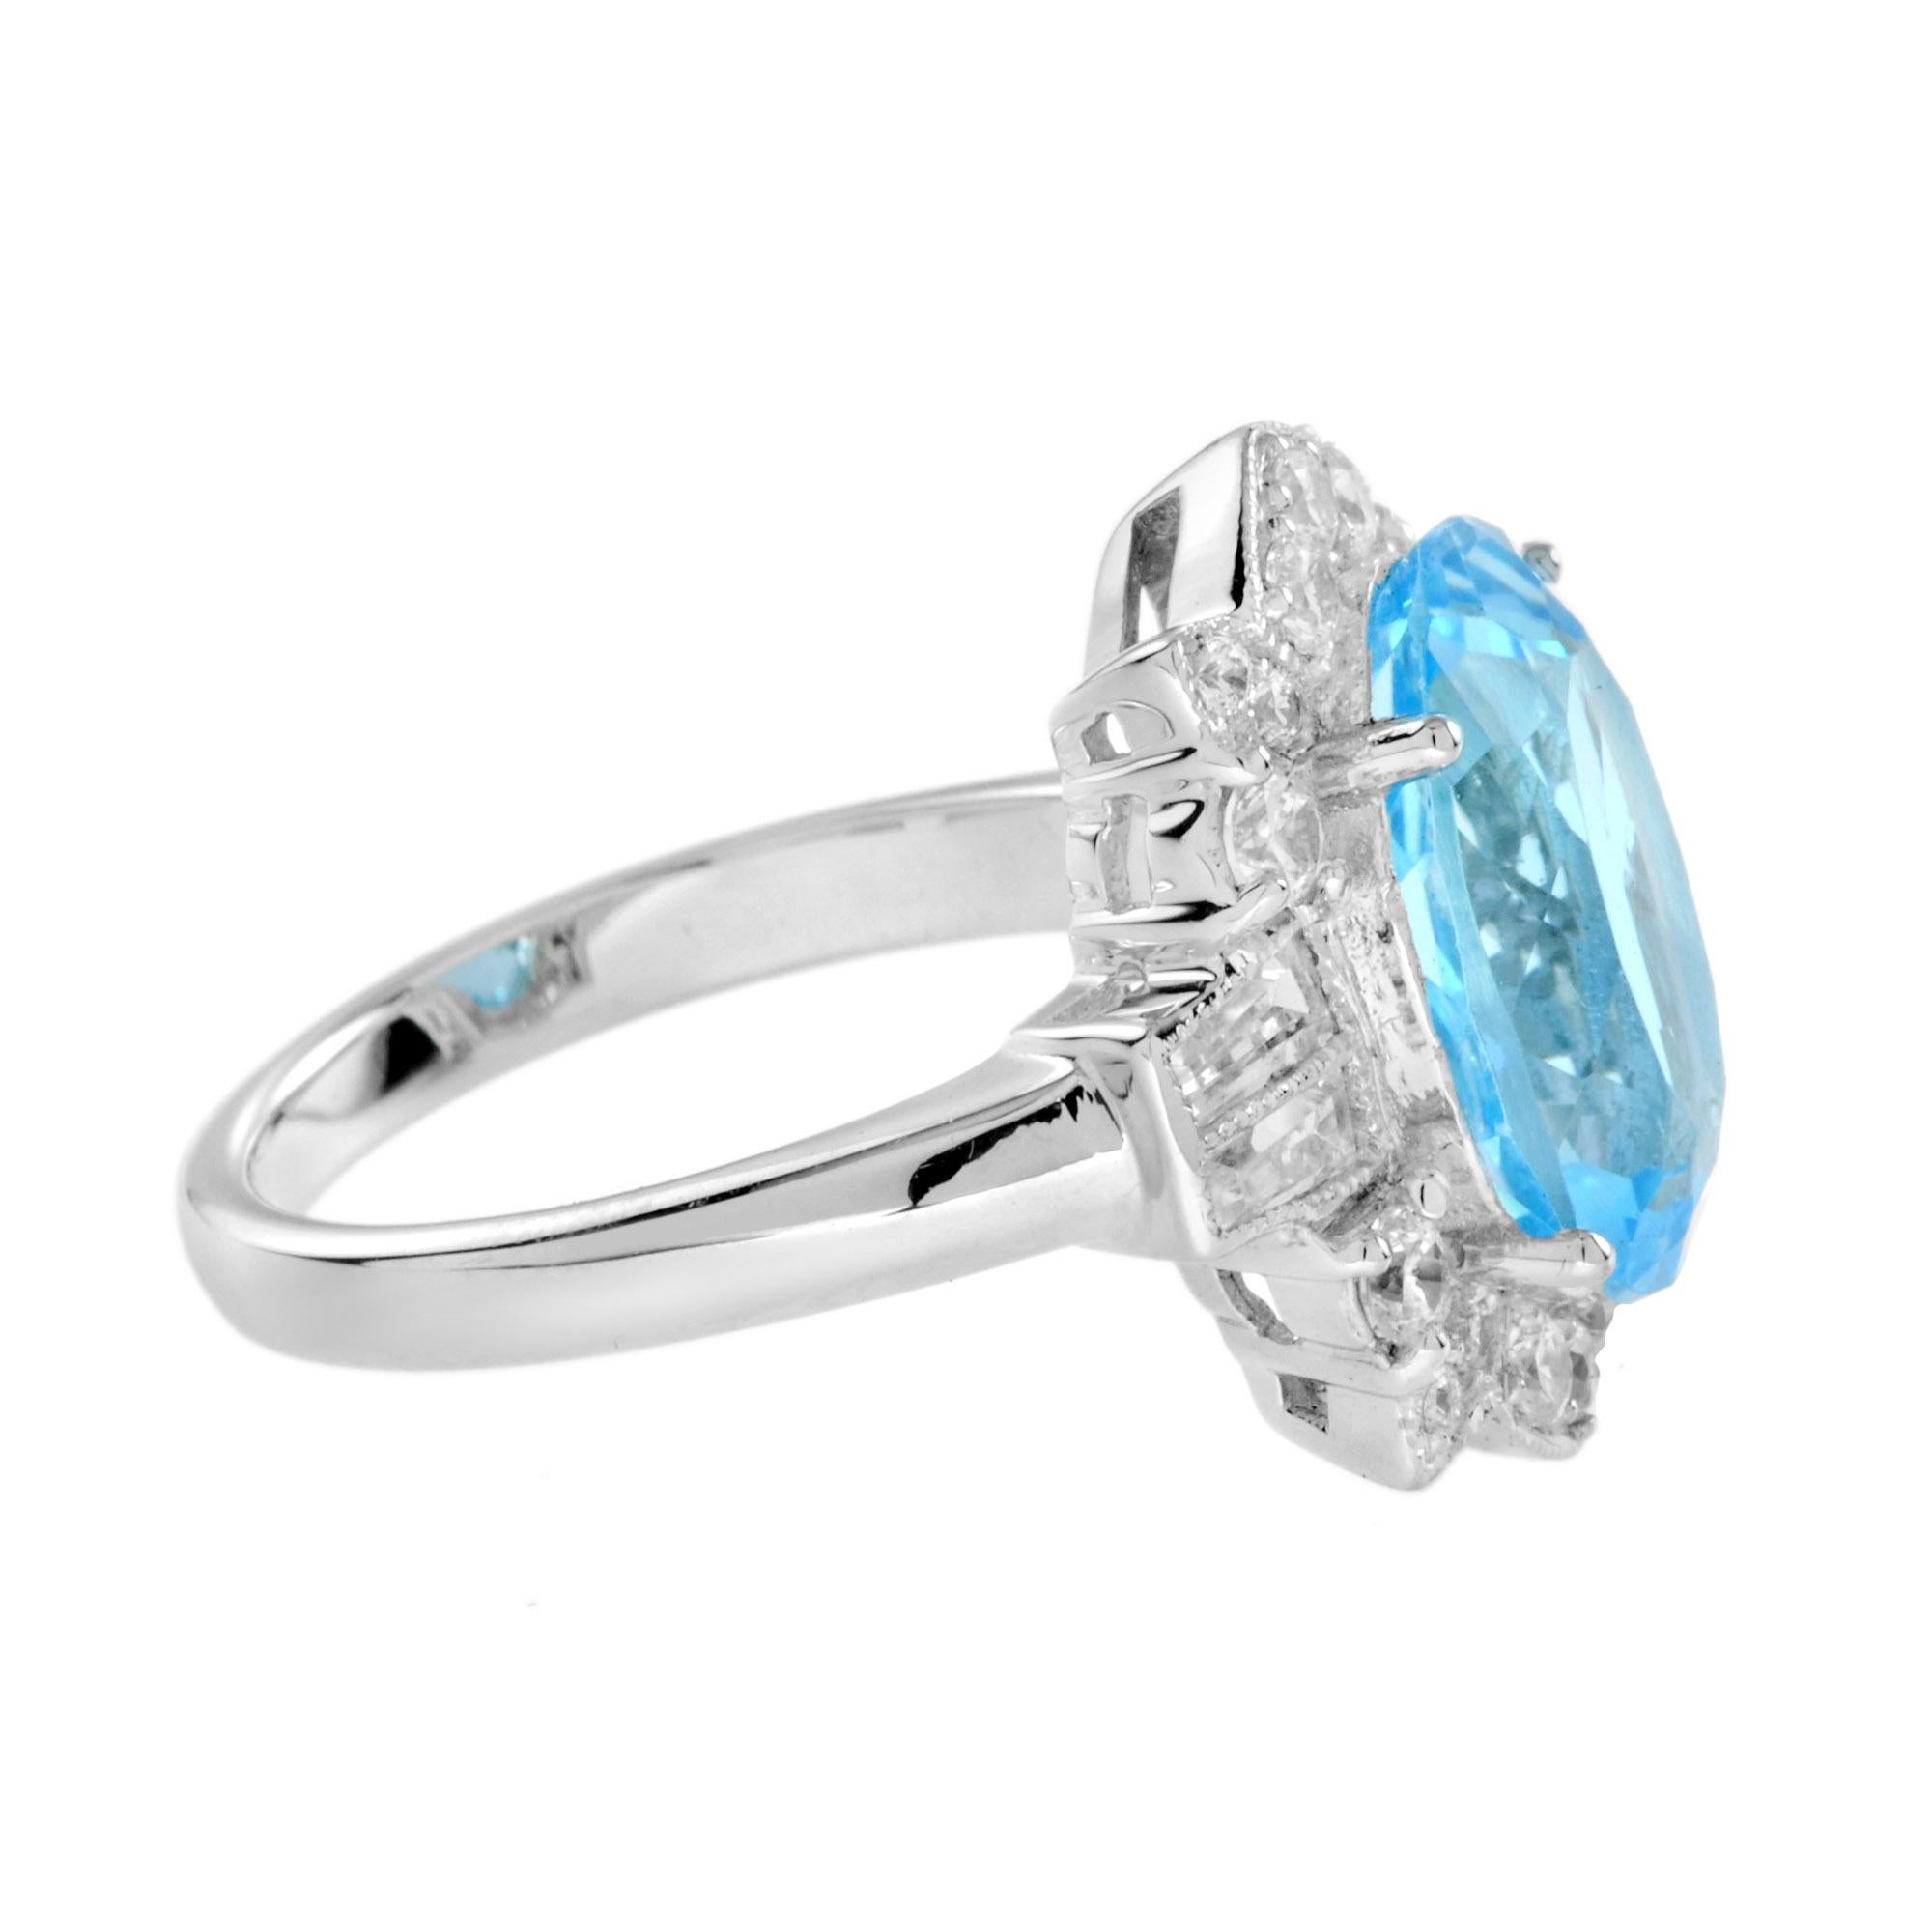 For Sale:  7.25 Ct. Oval Blue Topaz and Diamond Cocktail Ring in 18K White Gold 3